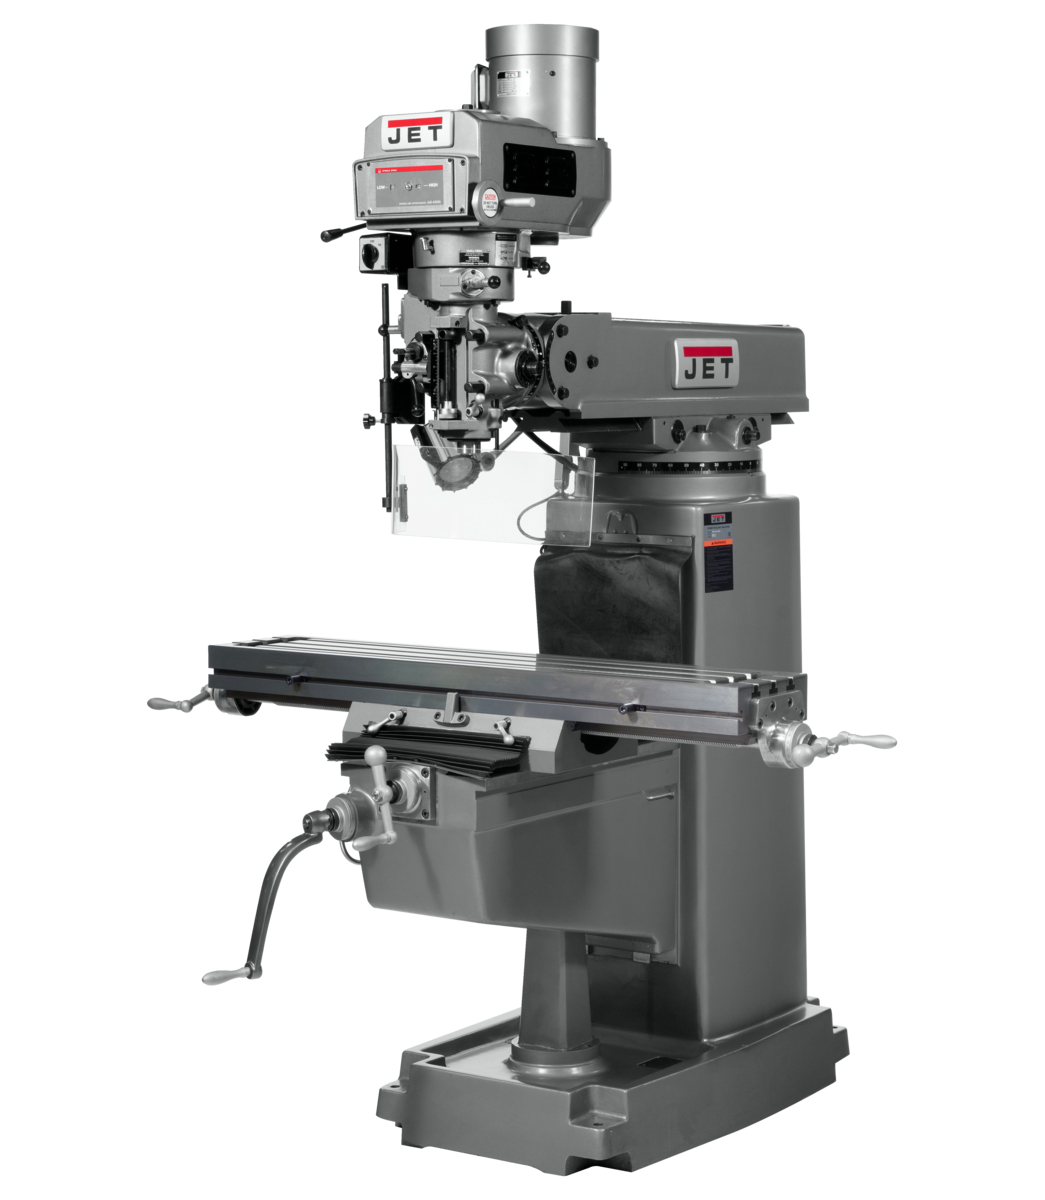 690164,The Jet JTM-1050 Mill With 3-Axis ACU-RITE 203 DRO (Knee) With X-Axis Powerfeed Only in Metalworking, Milling, Vertical Mills